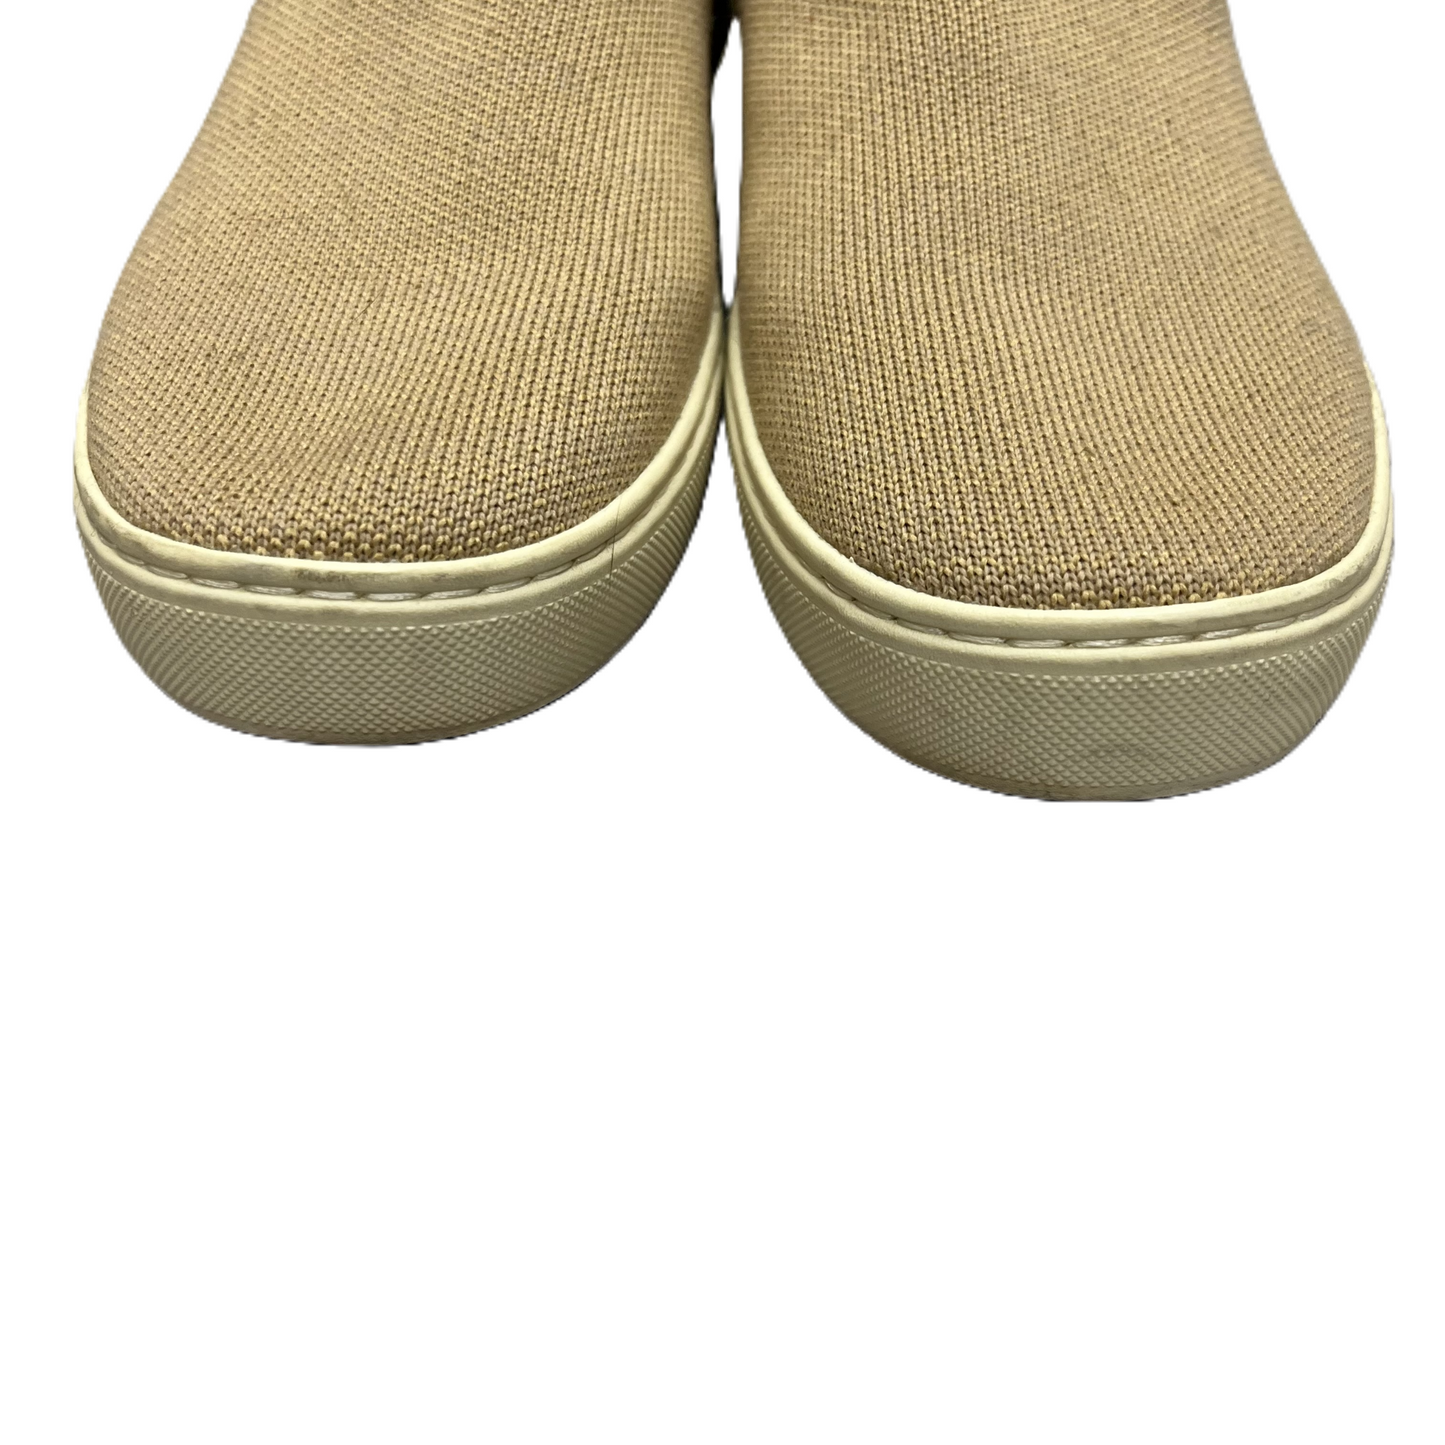 Tan Shoes Sneakers By Rothys, Size: 8